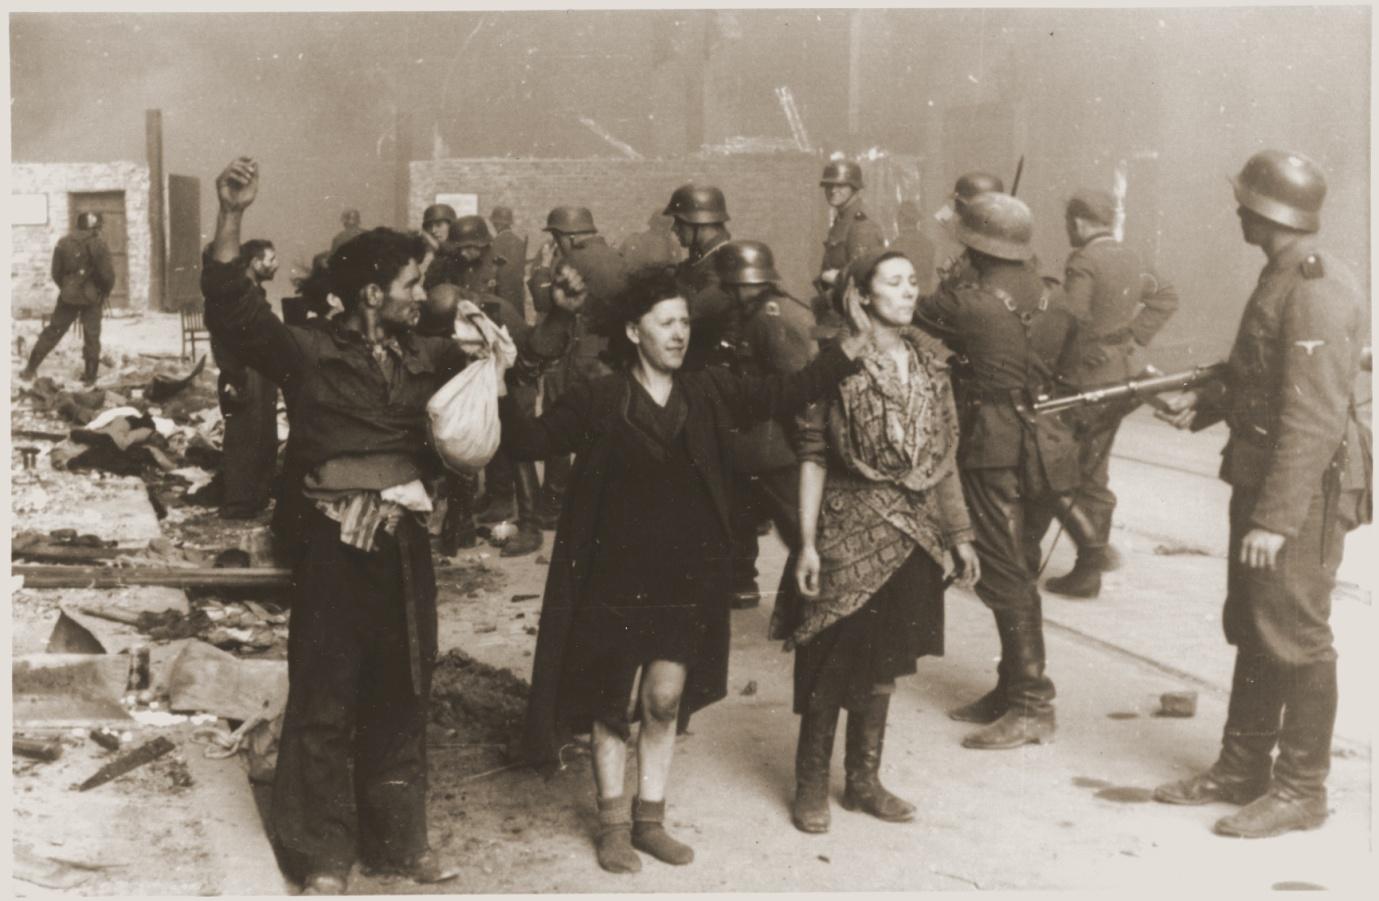  “Jewish Resistance Fighters Captured by SS Troops during the Warsaw Ghetto Uprising, Warsaw, Poland, April 19-May 16, 1943”